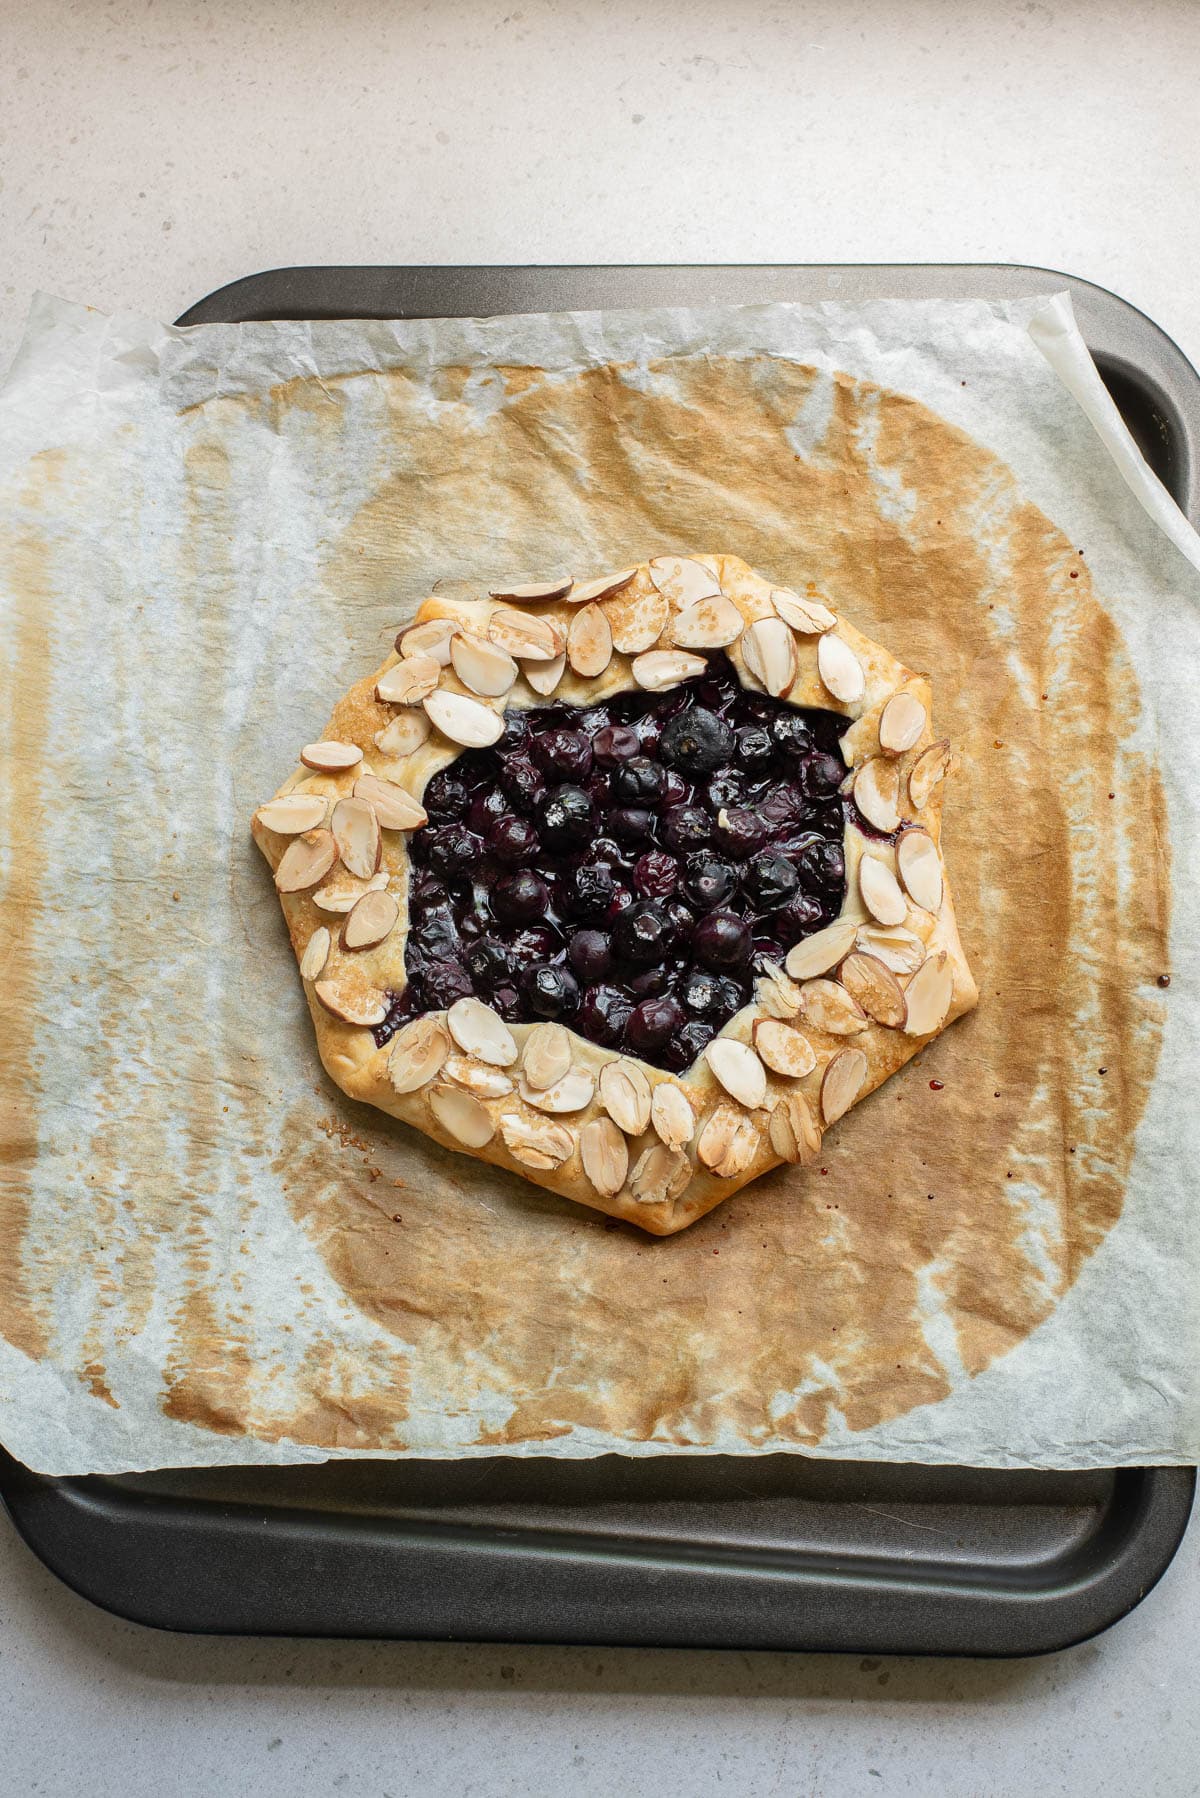 Baked blueberries in a pie crust on parchment paper sprinkled with almonds.